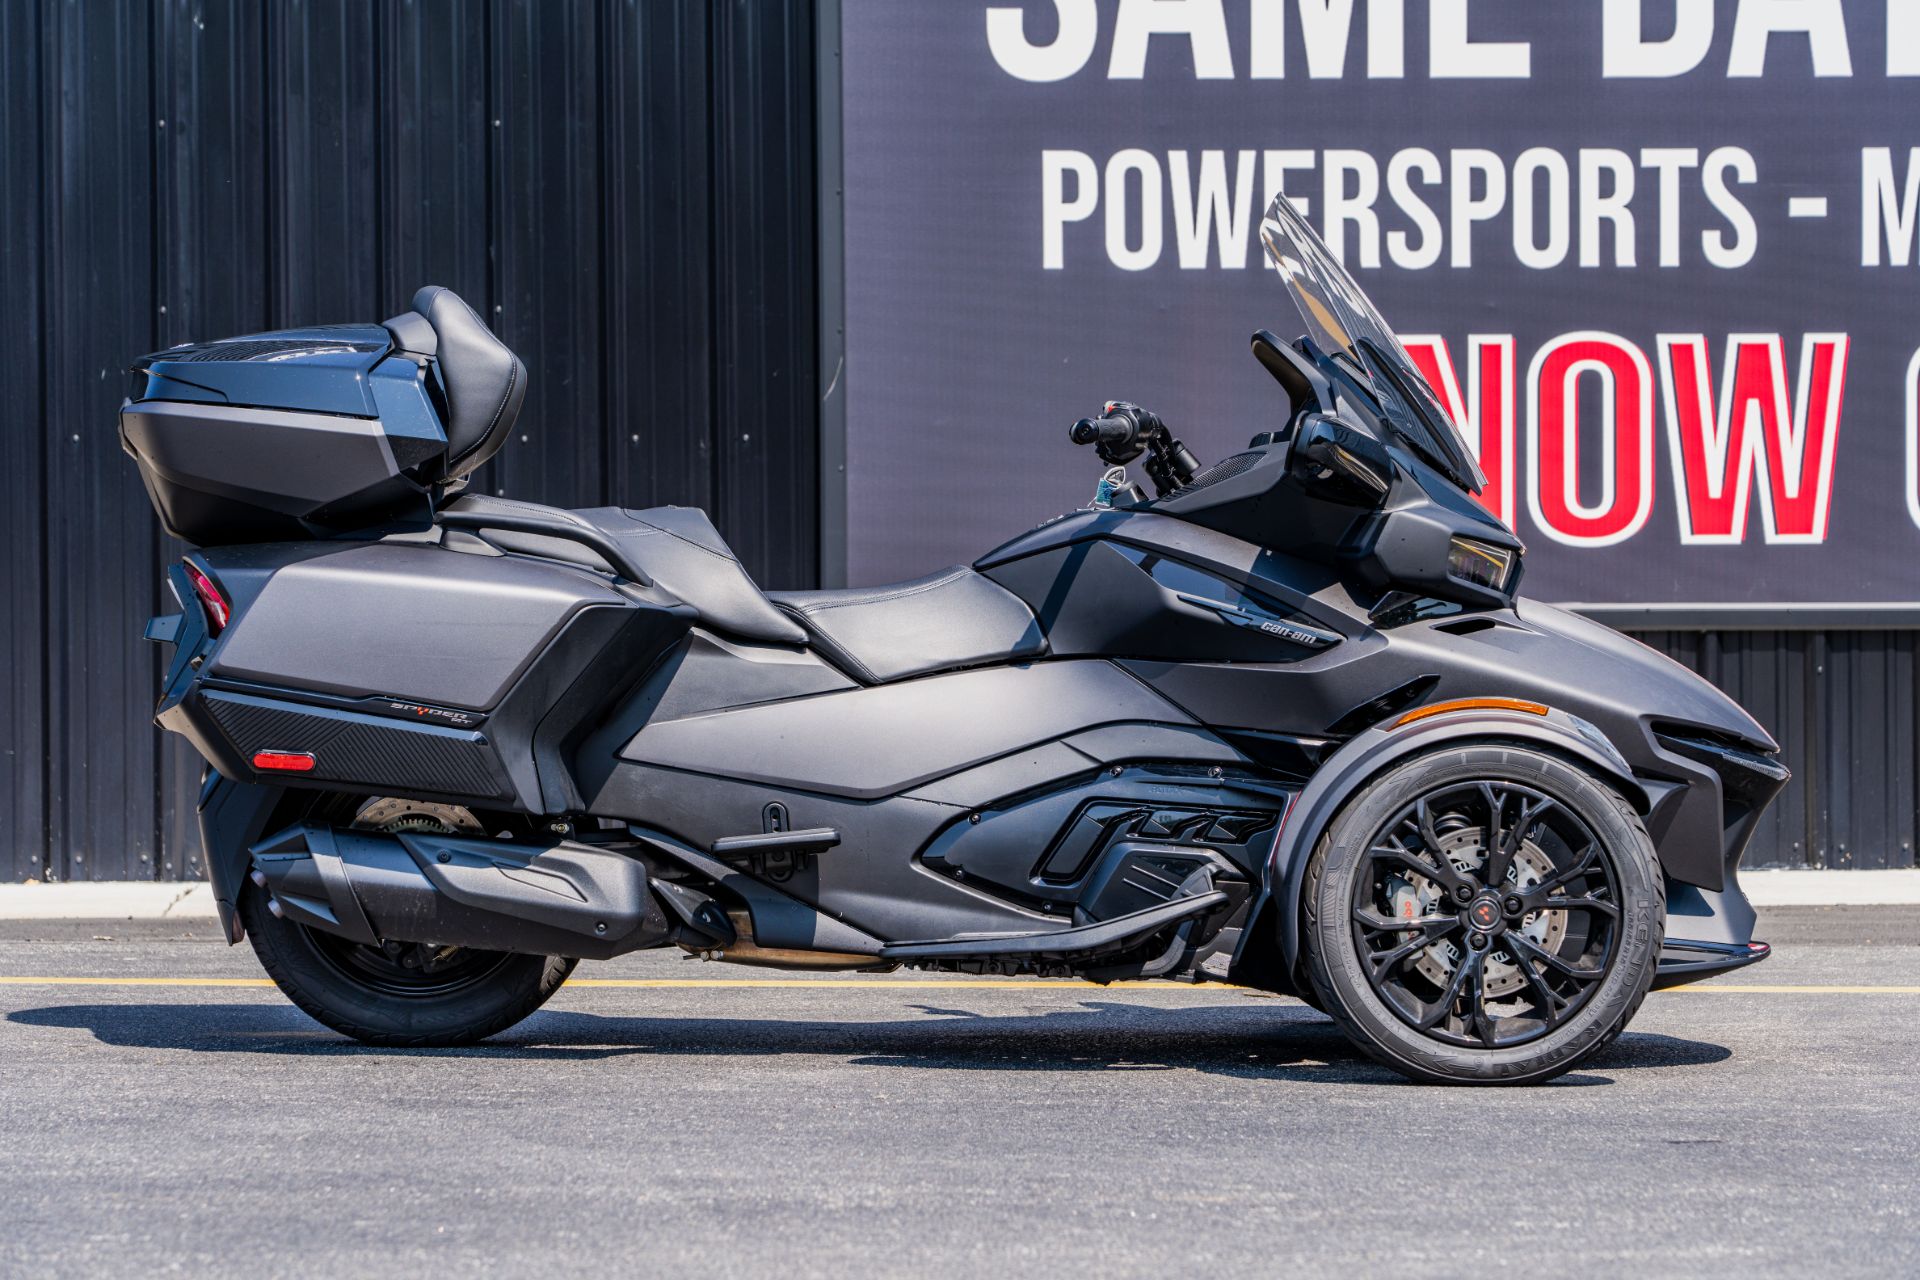 2023 Can-Am Spyder RT Limited in Byron, Georgia - Photo 3